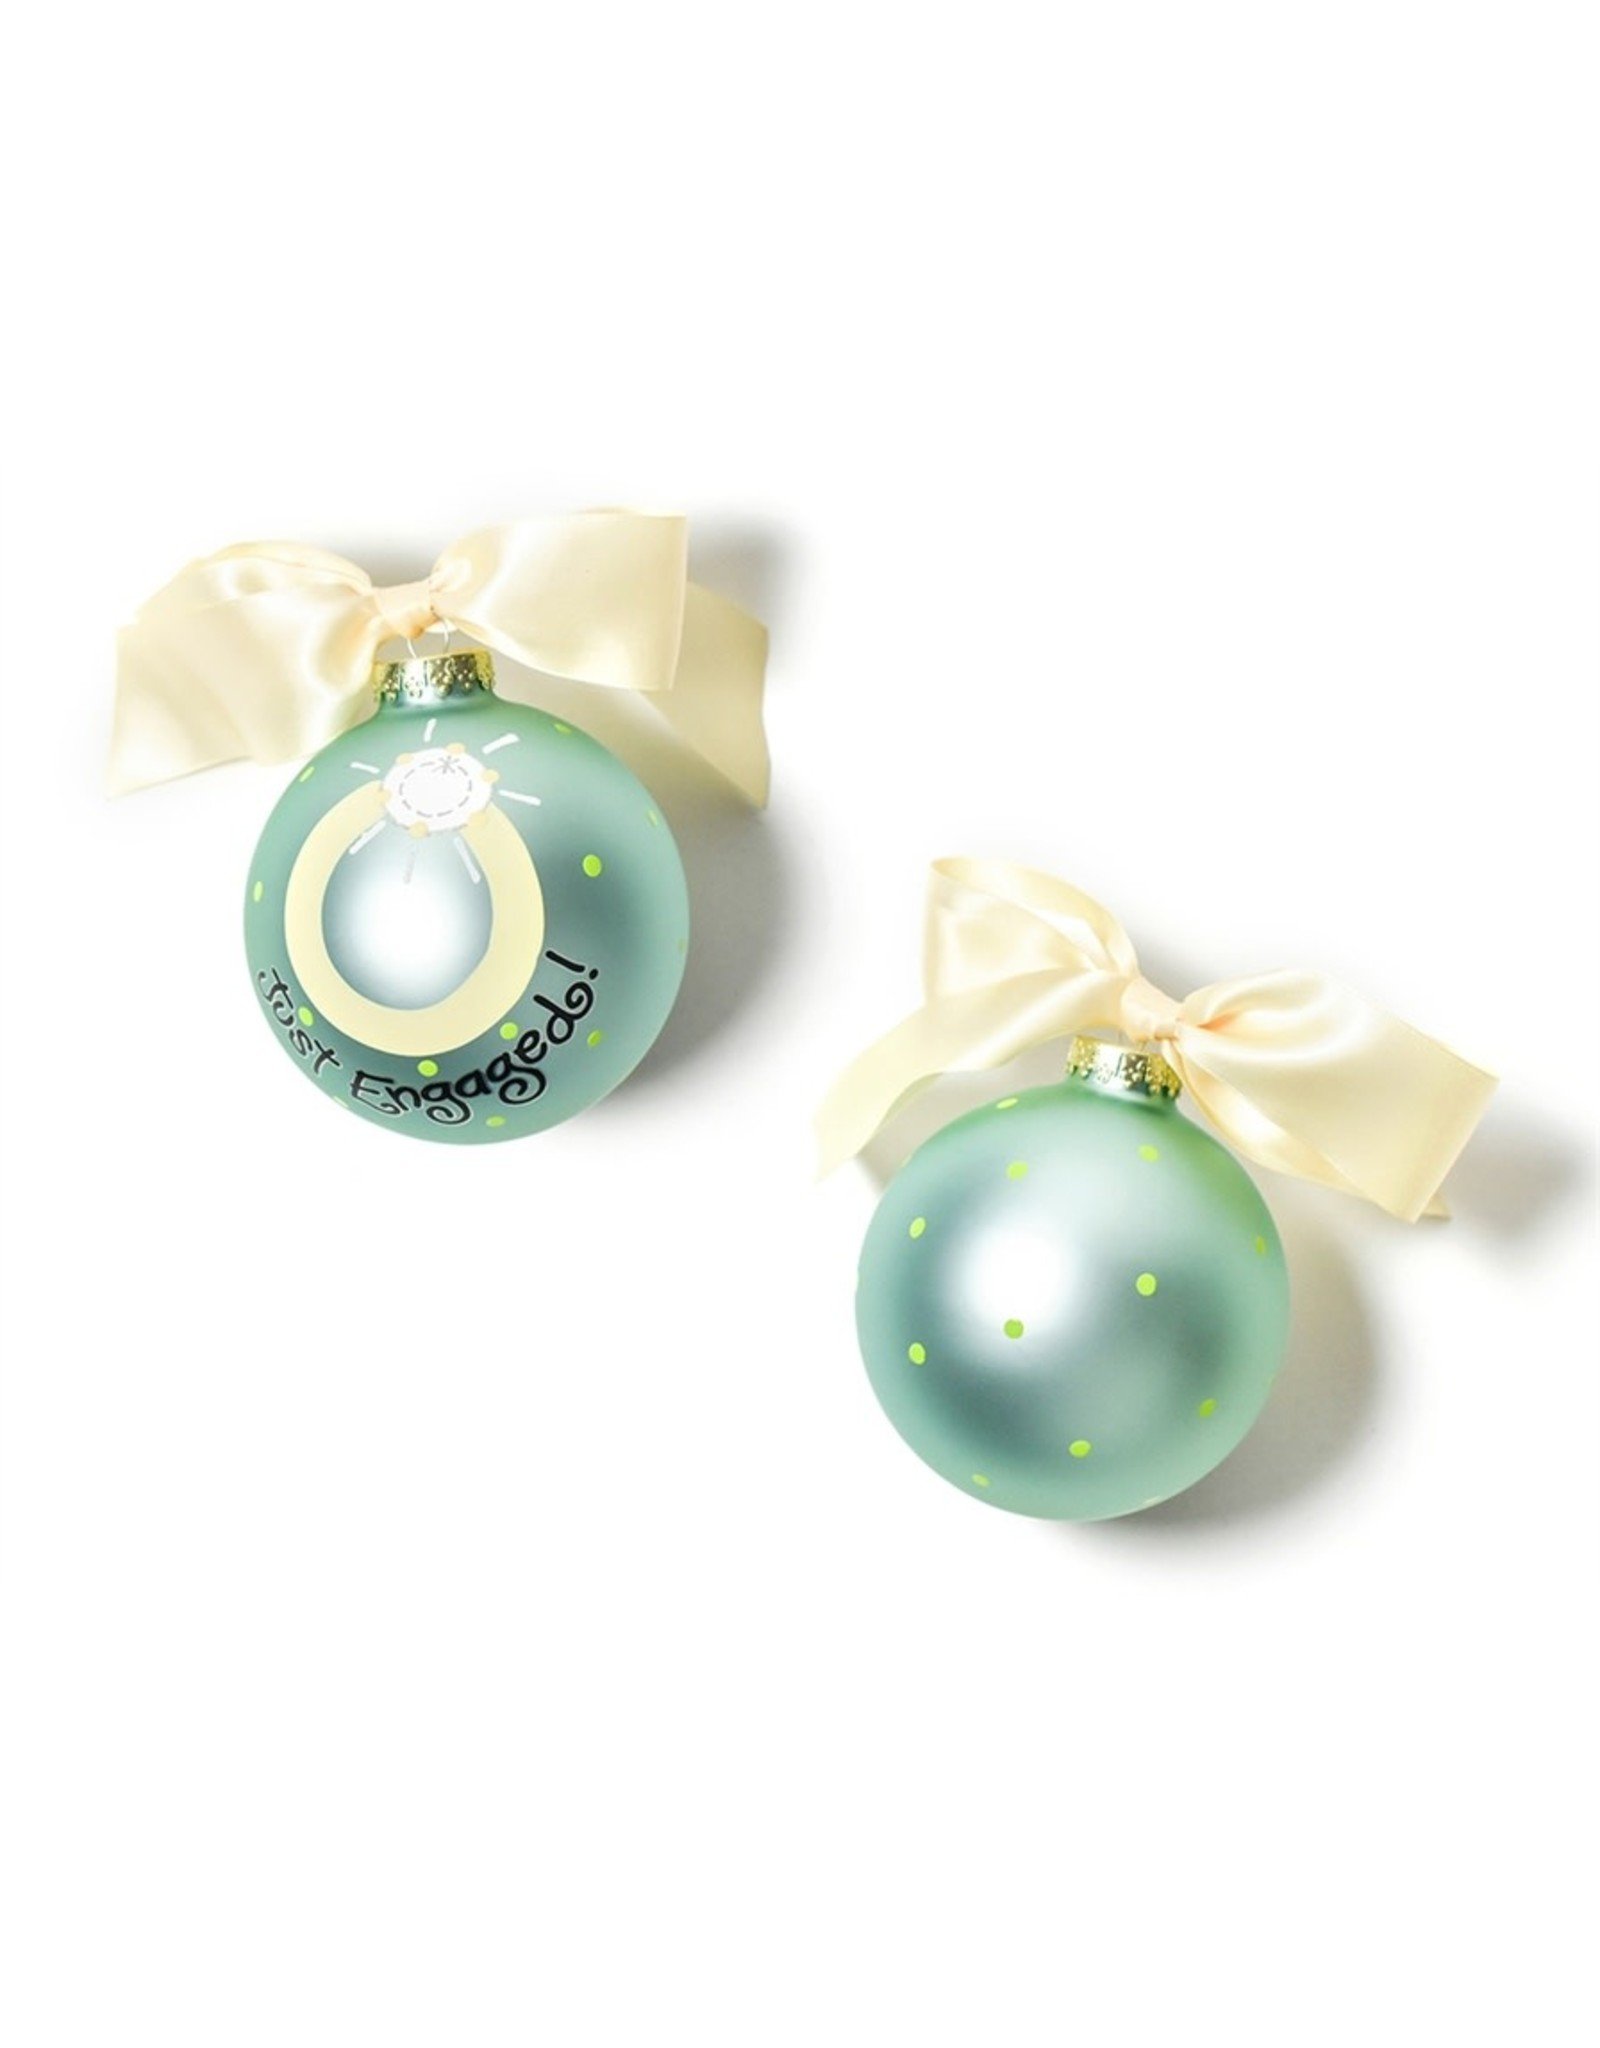 Coton Colors Just Engaged Glass Ornaments